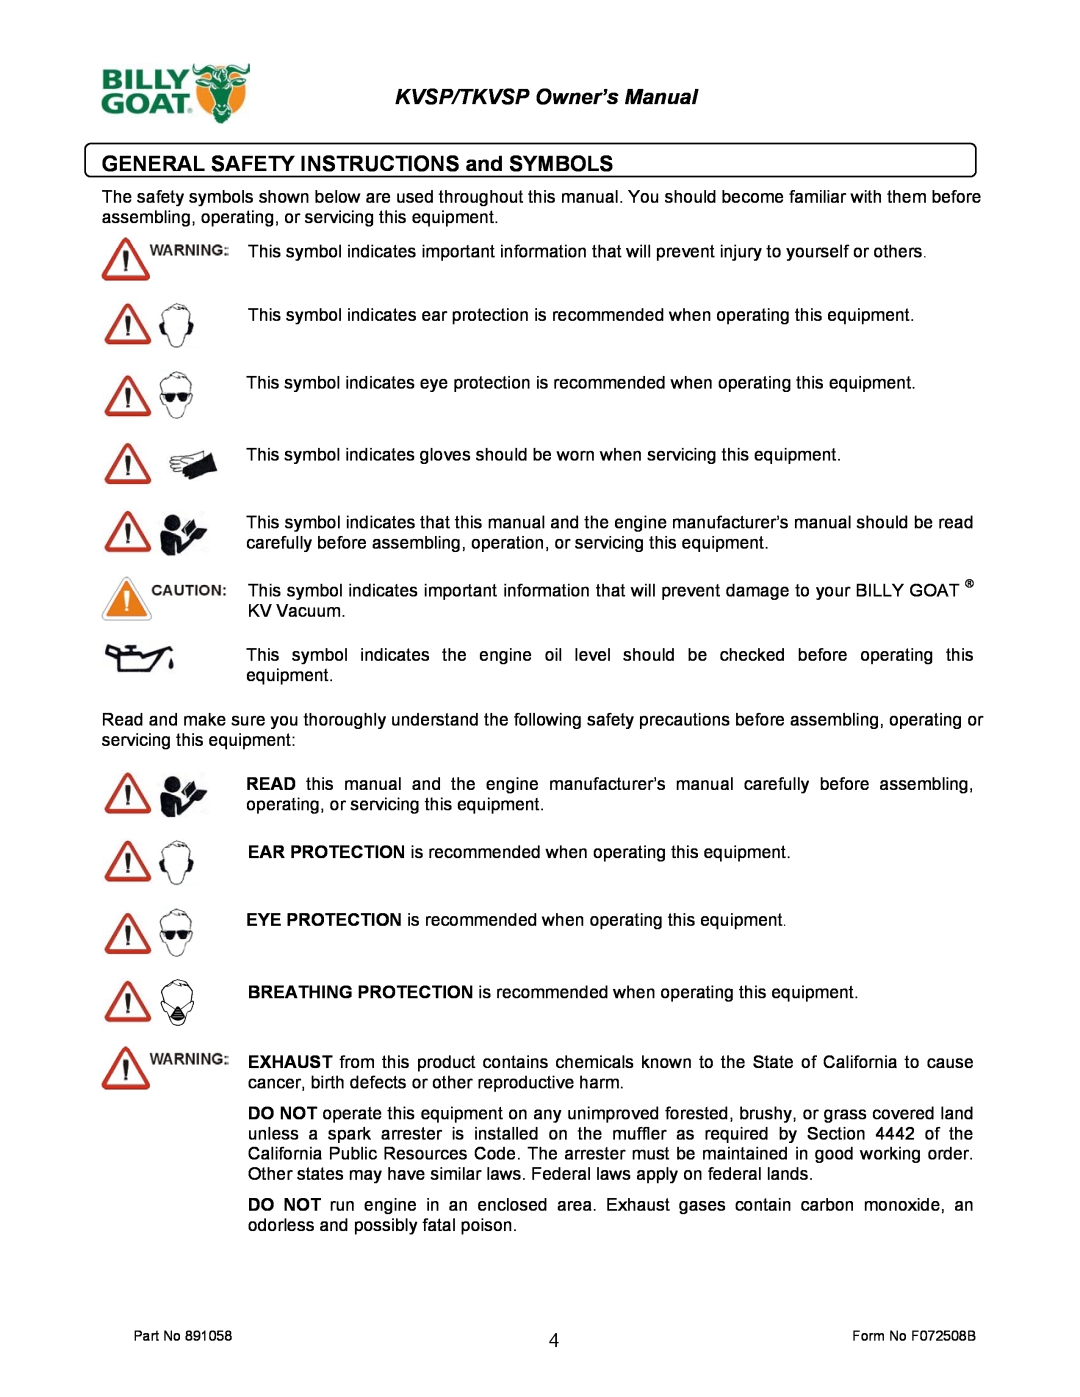 Billy Goat TKV650SPH owner manual GENERAL SAFETY INSTRUCTIONS and SYMBOLS 